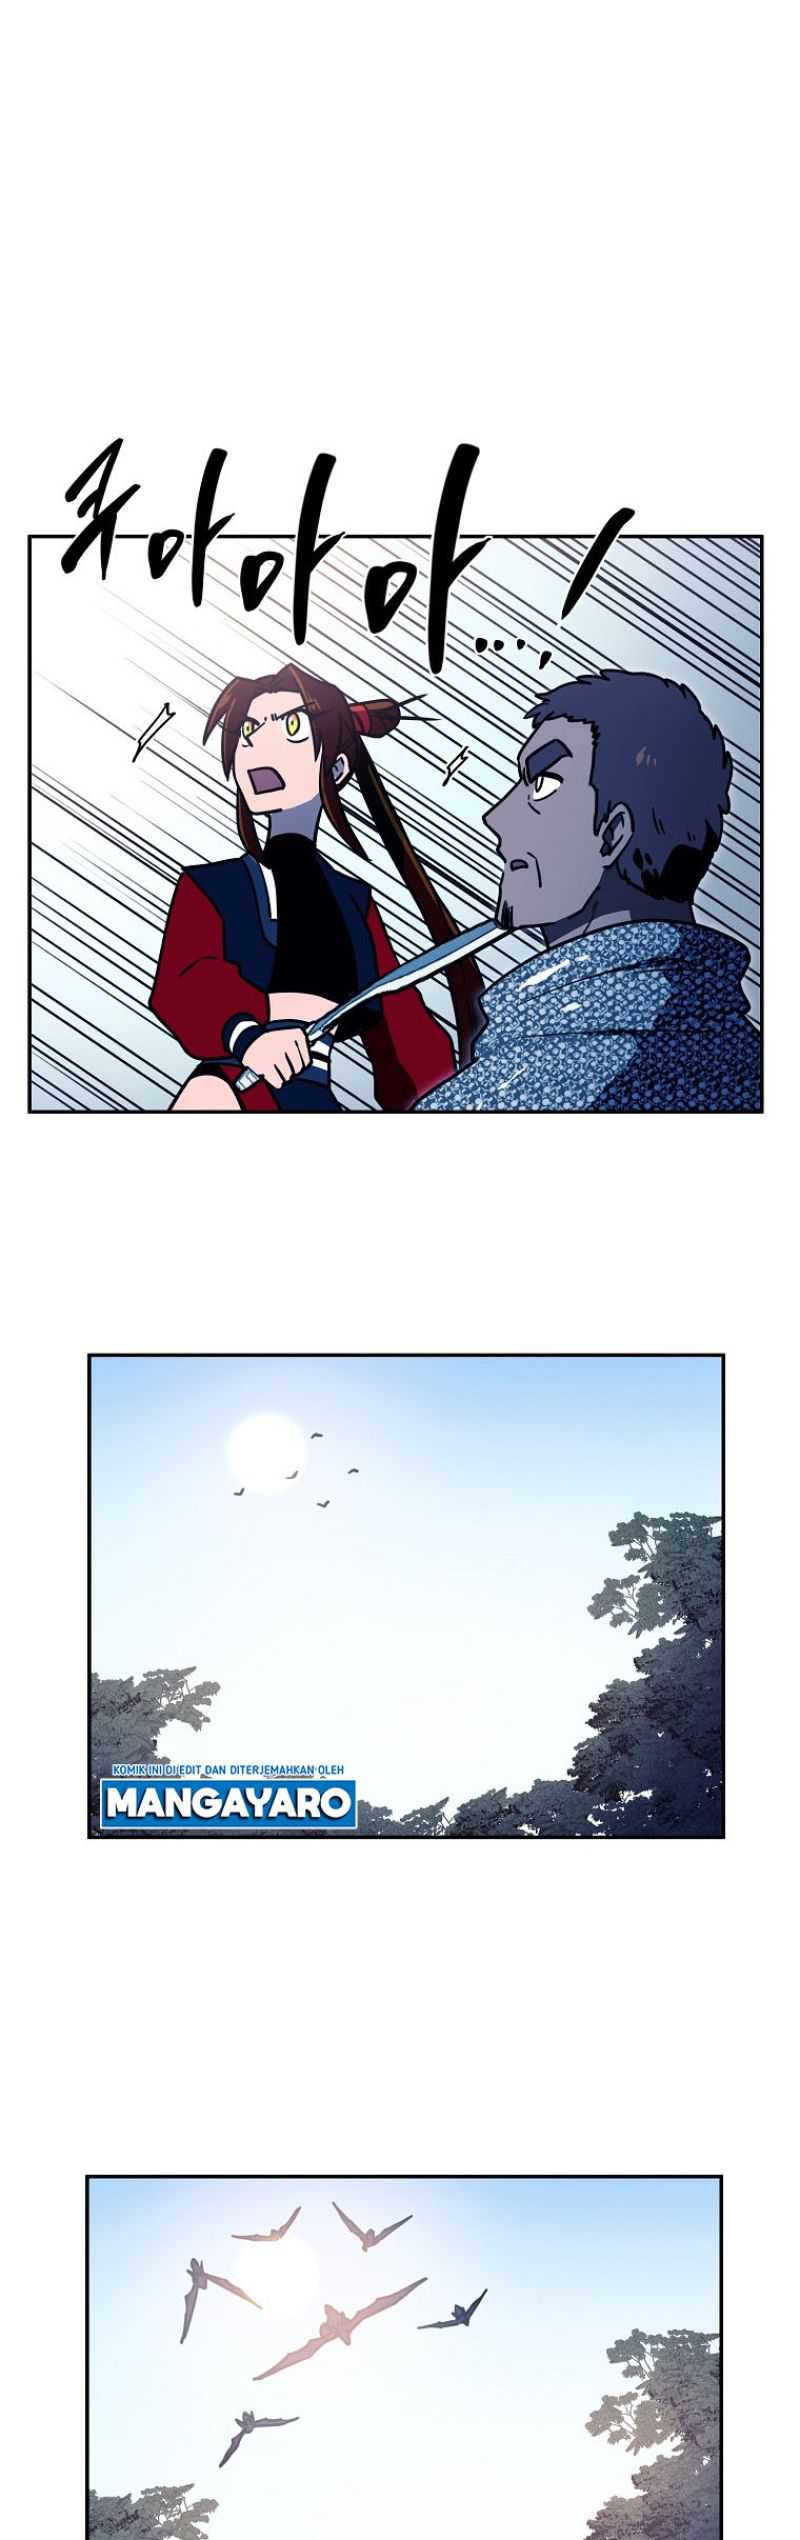 Magical Shooting: Sniper of Steel Chapter 48